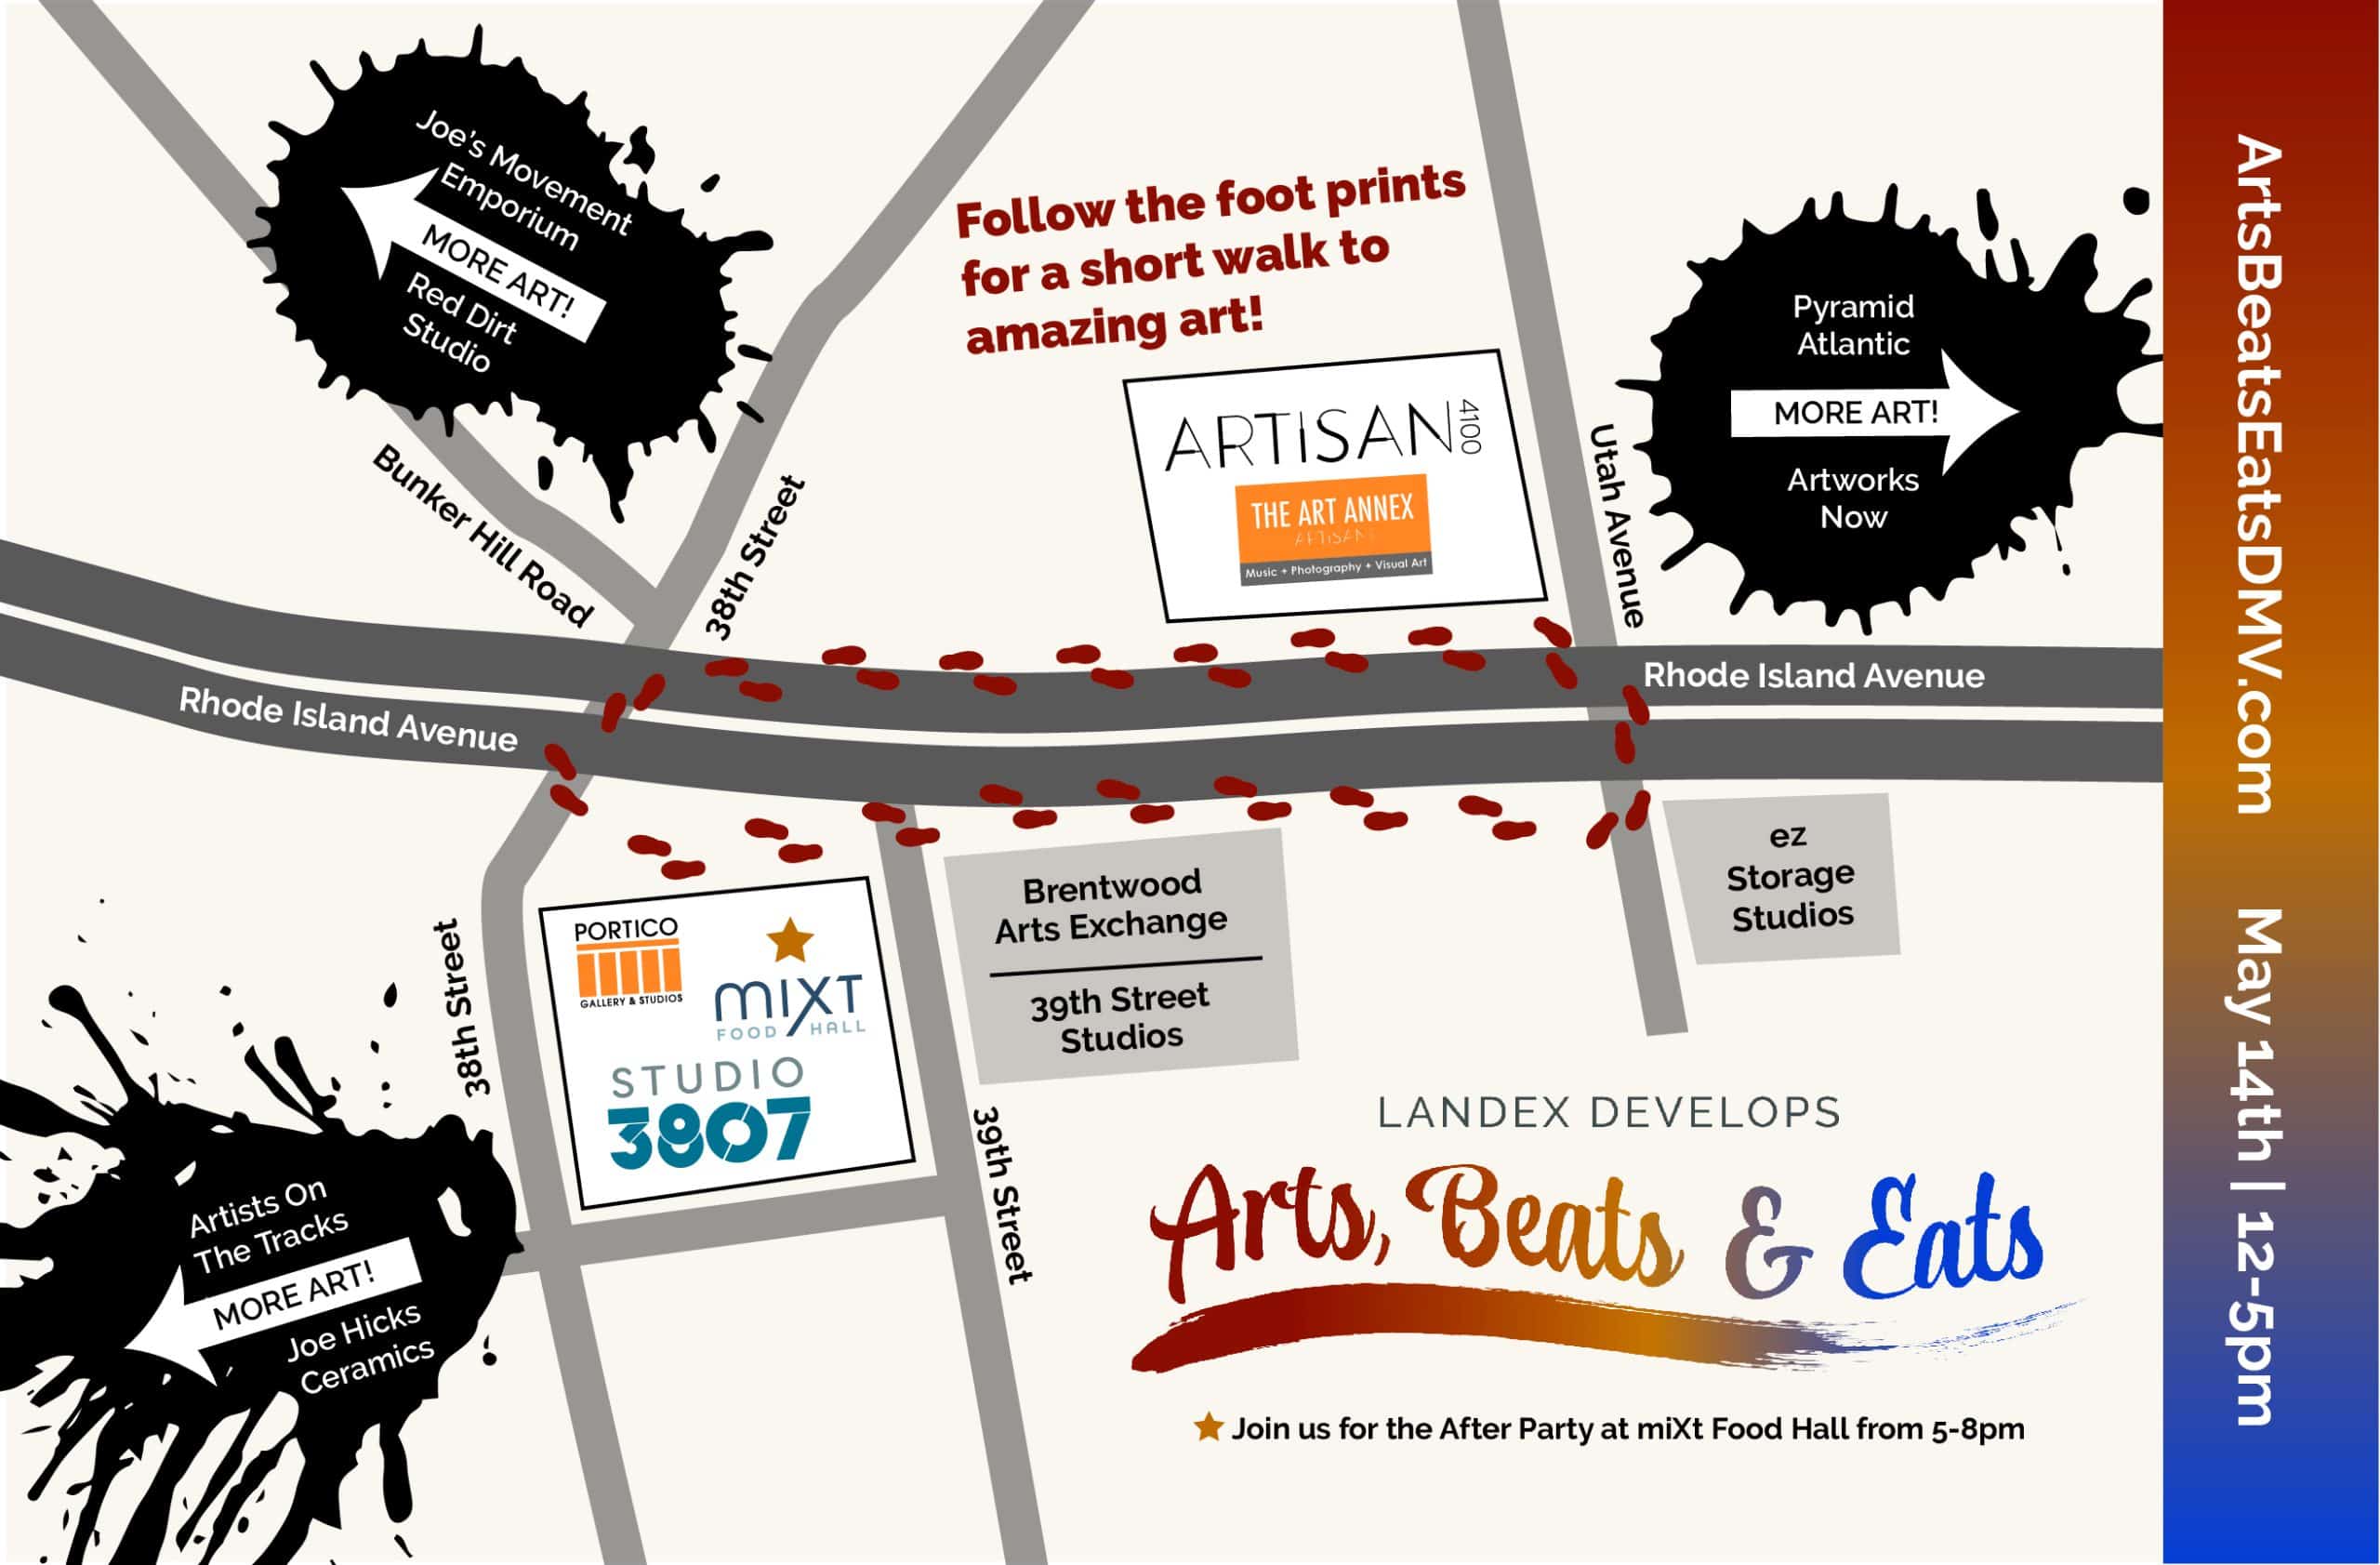 Arts Beats & Eats, May 14 from 12-5PM (after party 5-8PM)